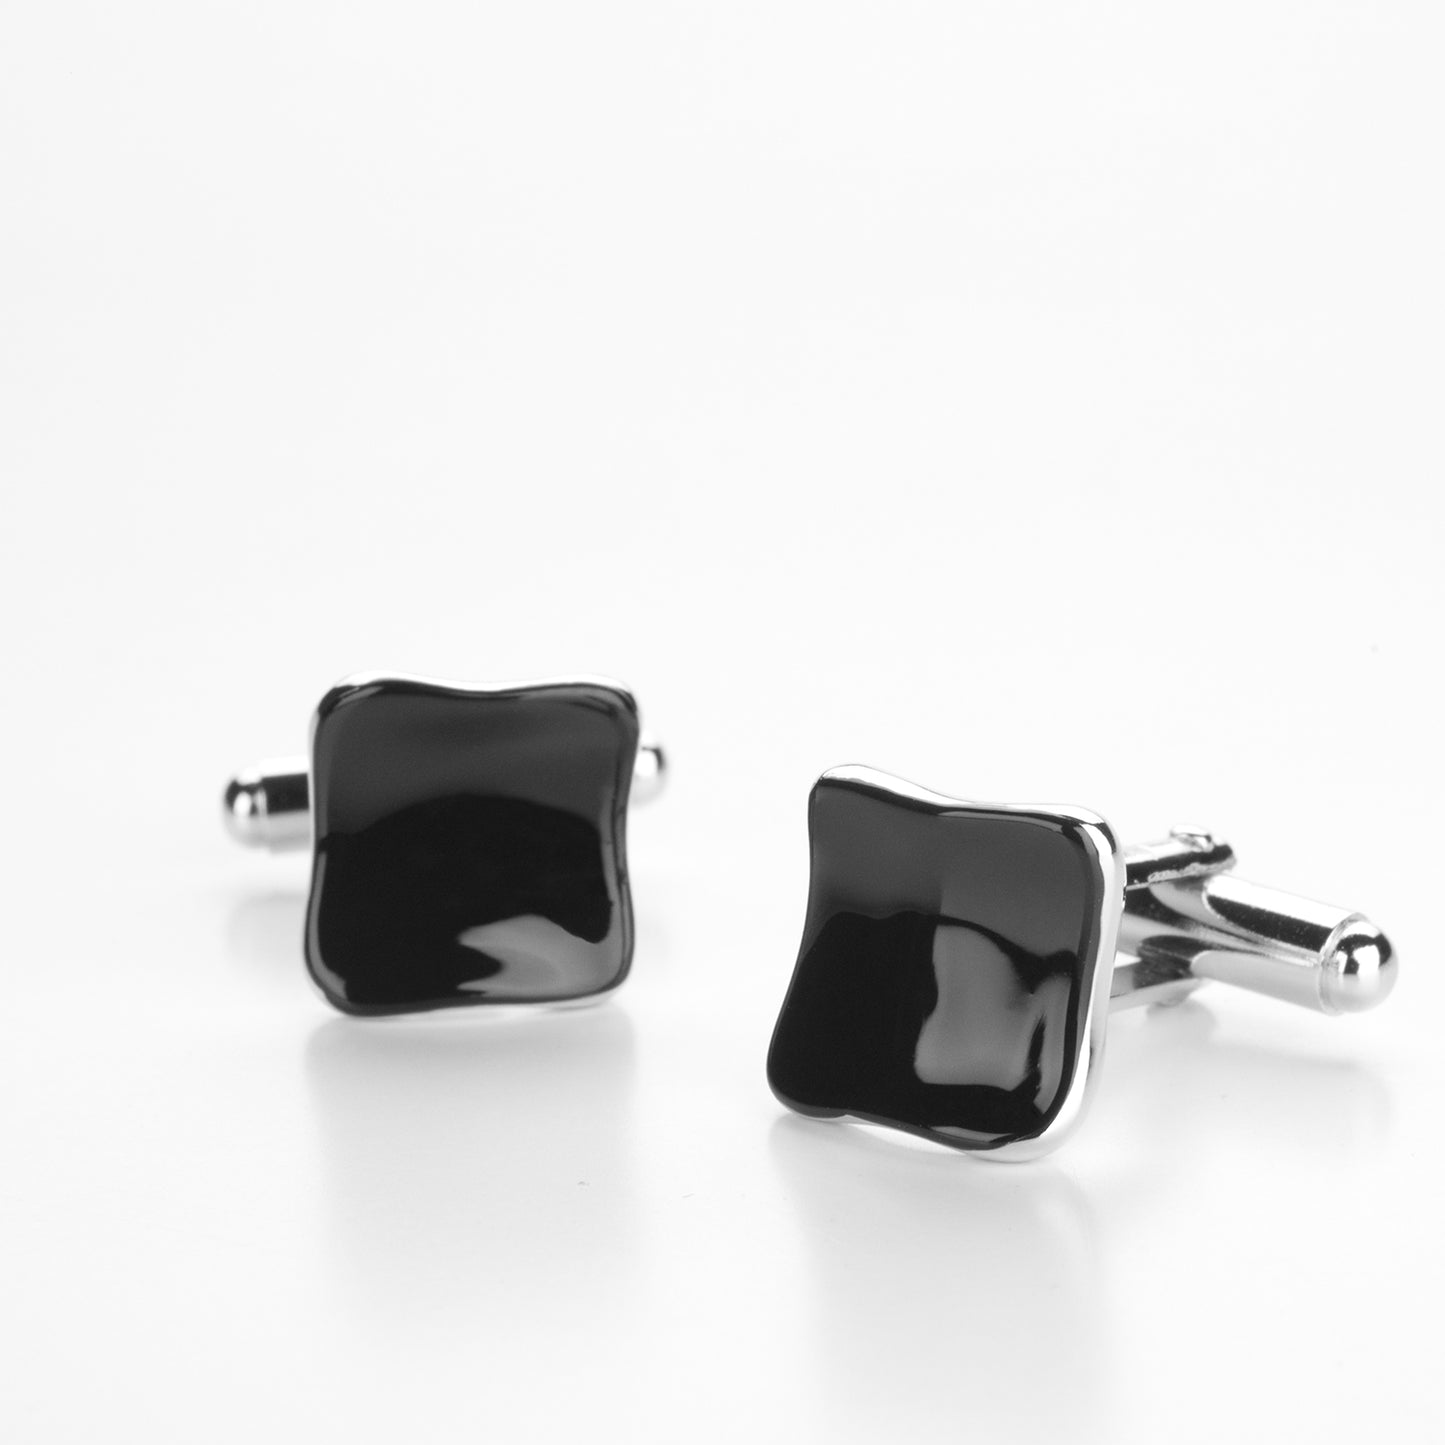 Square cufflinks in silver and black enamel.